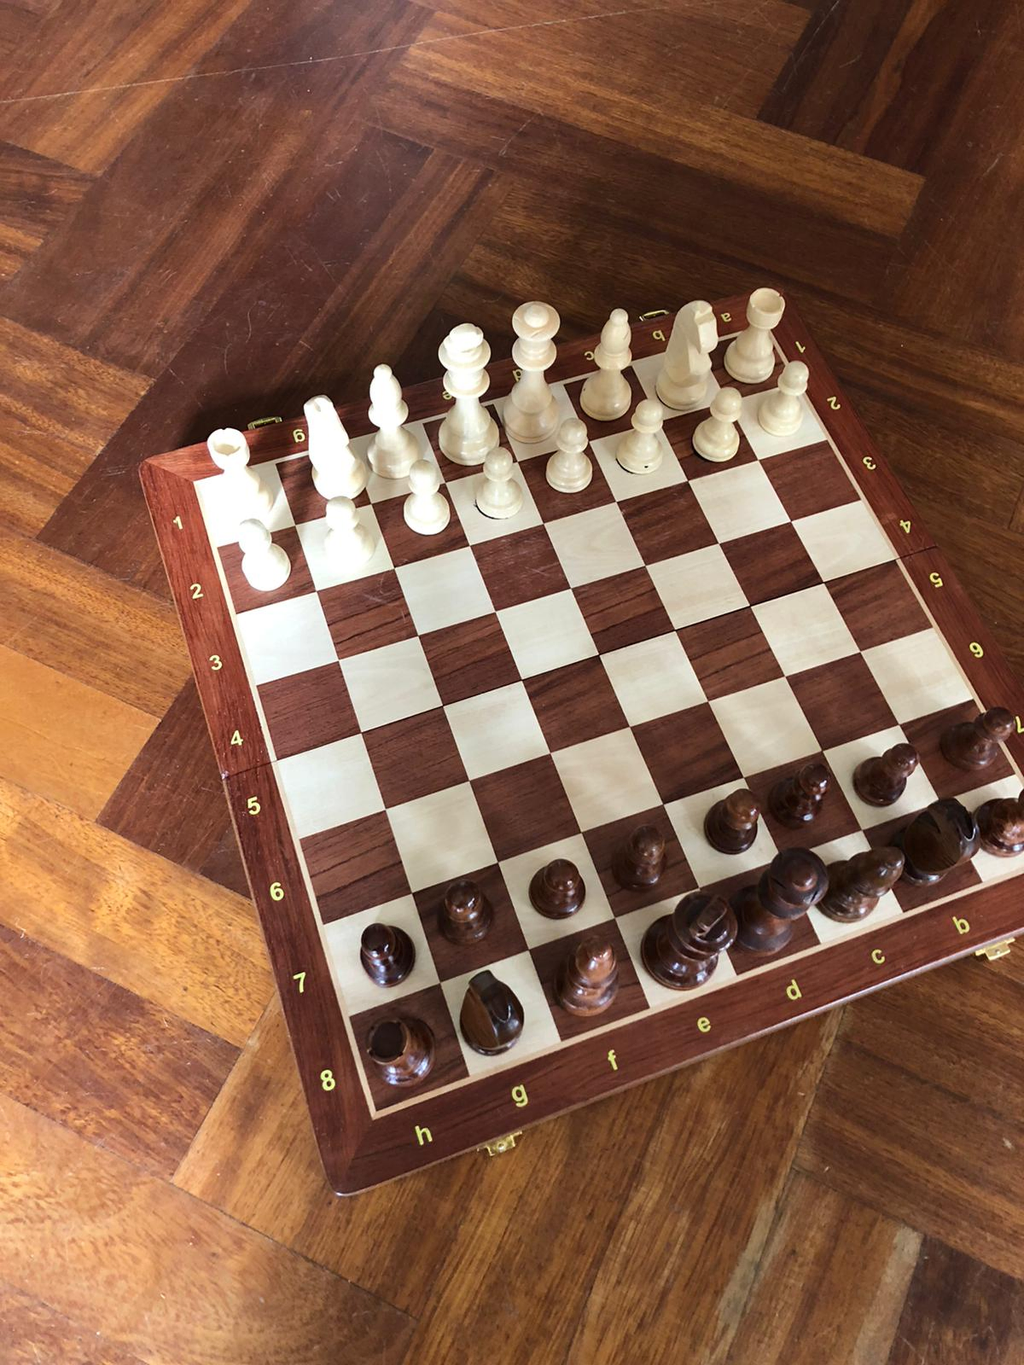 Wooden Chessboard with chess figures in start position. Affordable rental with BIYU.